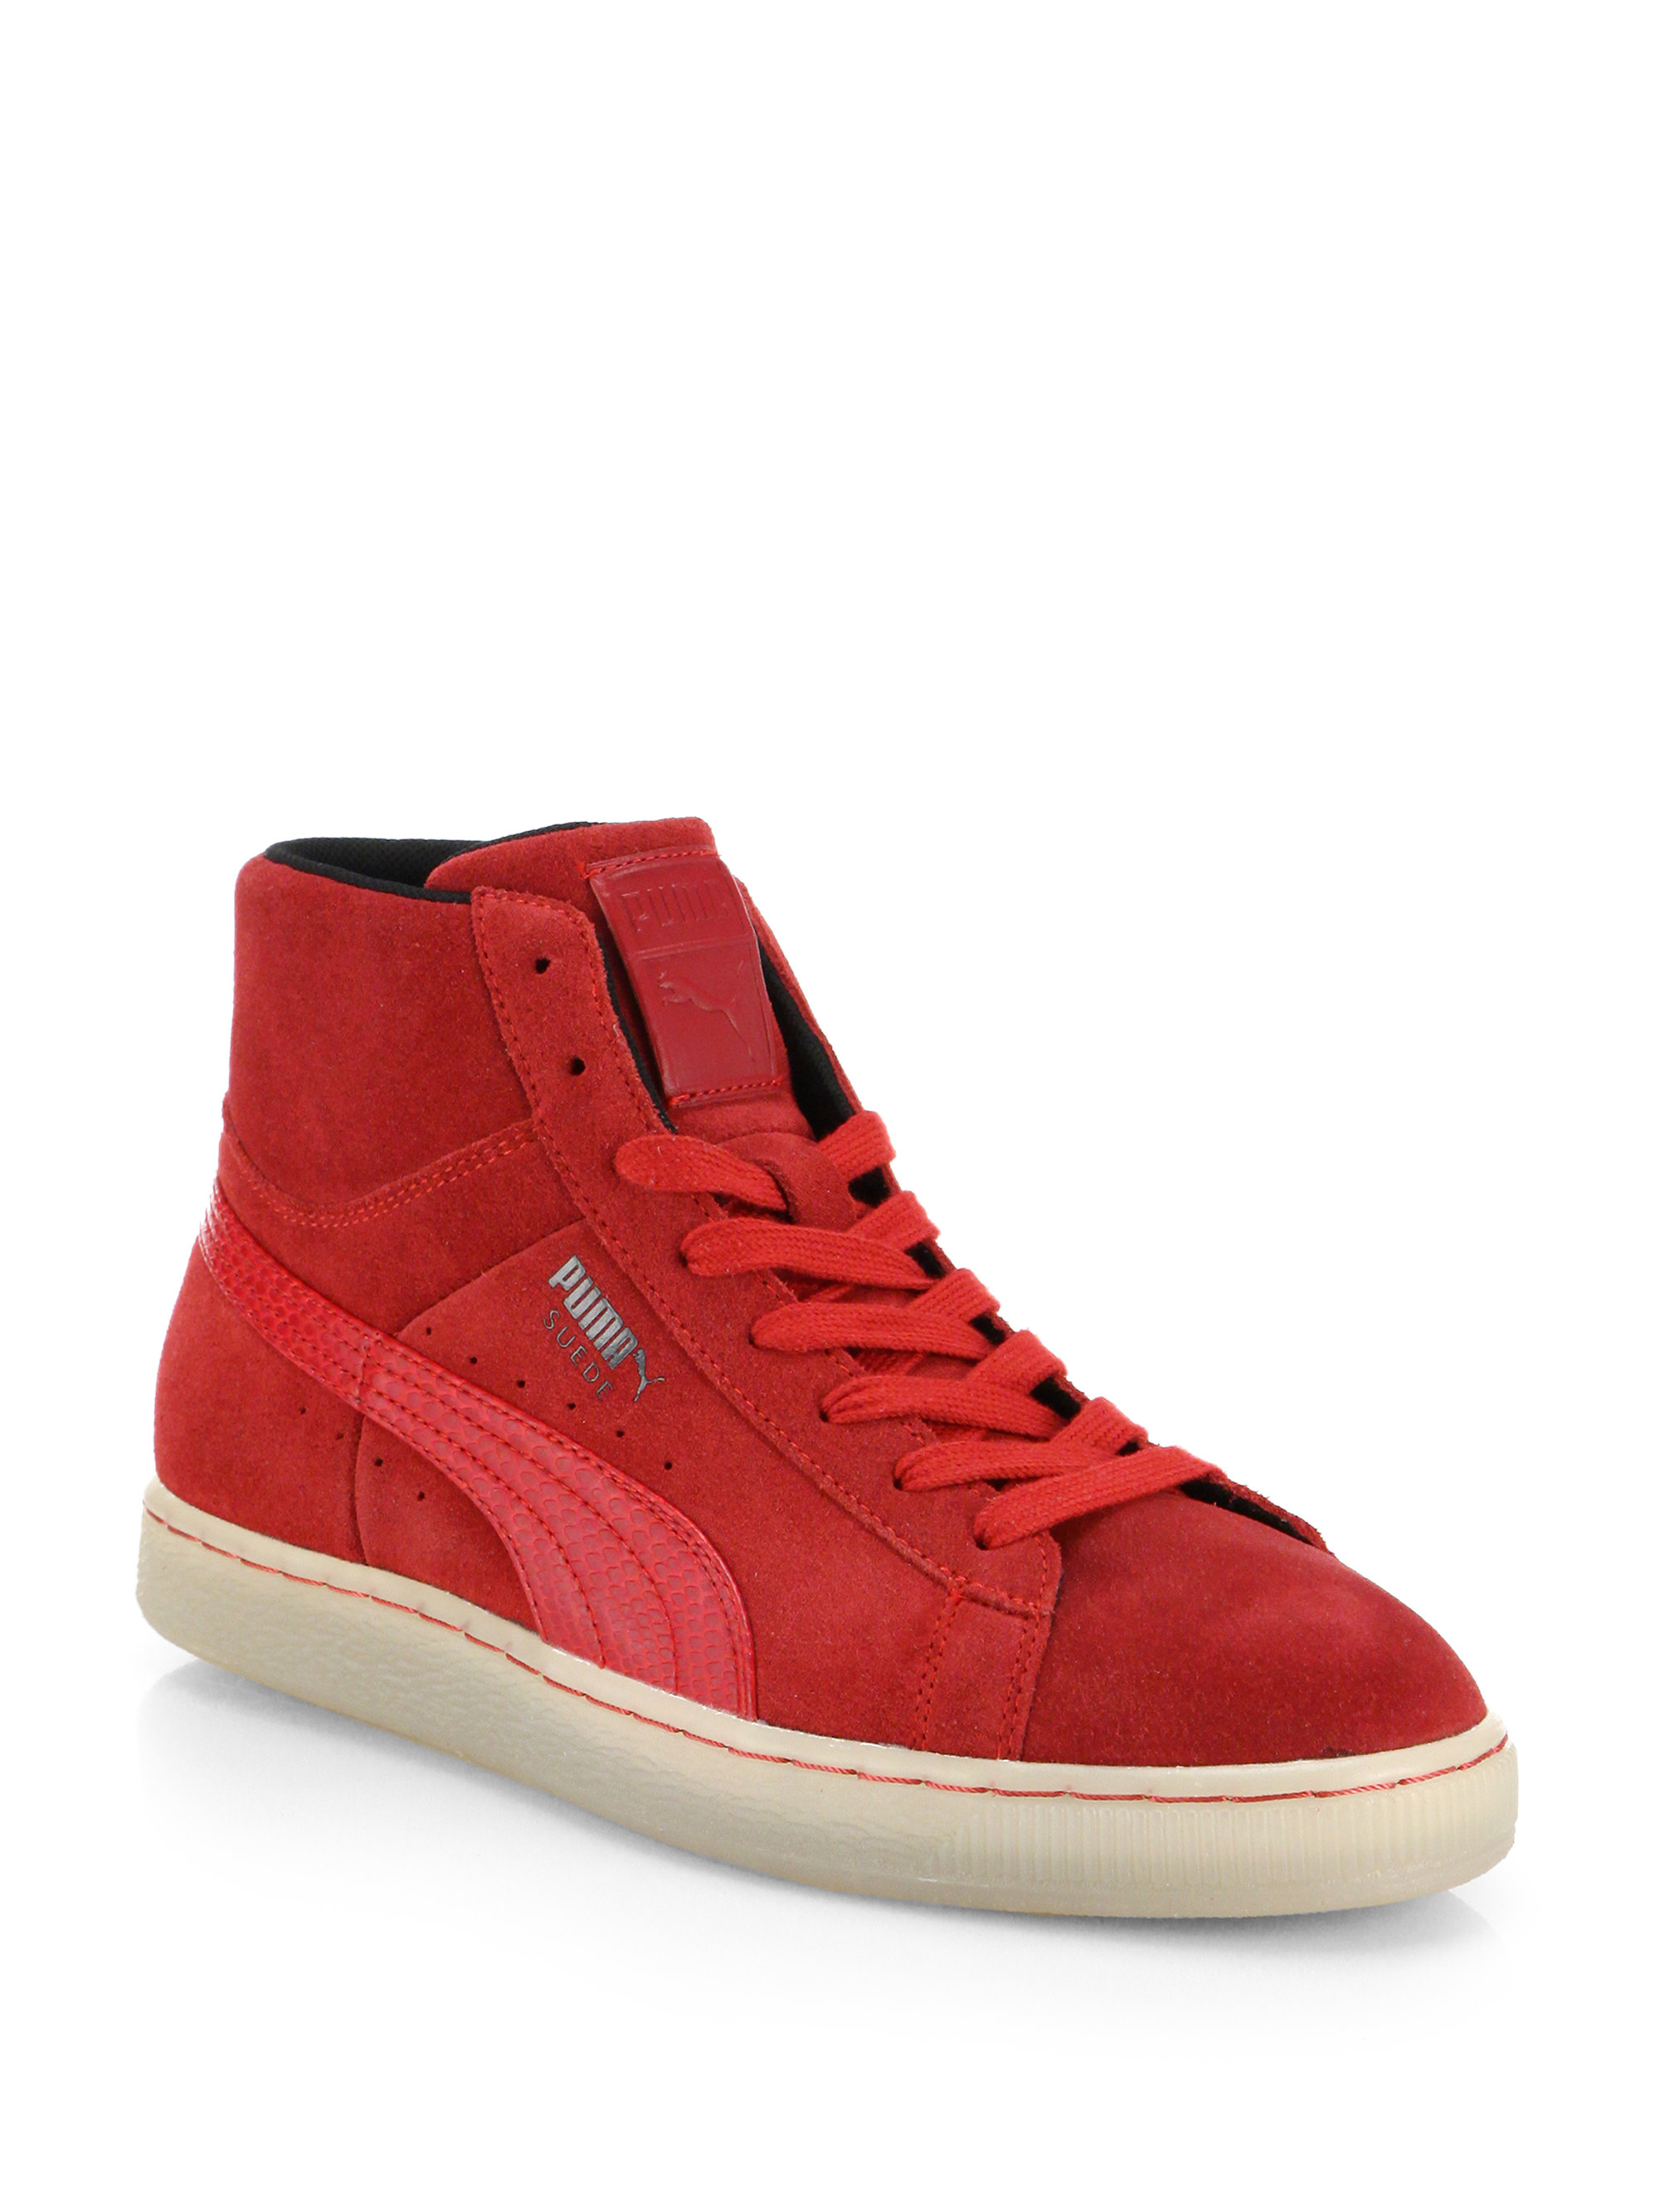 high top red pumas